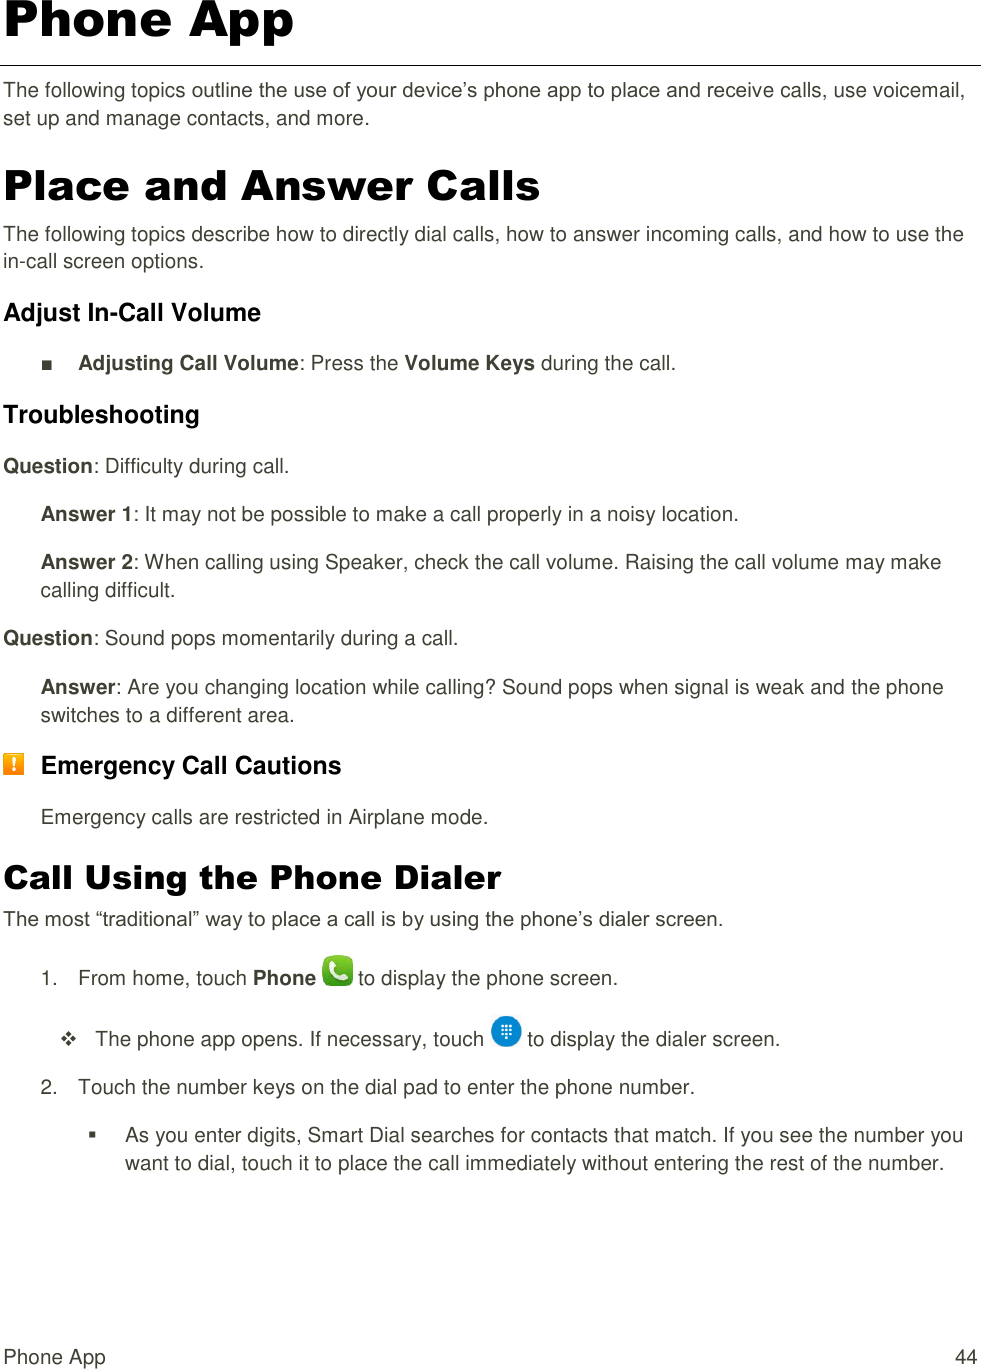 Phone App  44 Phone App The following topics outline the use of your device’s phone app to place and receive calls, use voicemail, set up and manage contacts, and more. Place and Answer Calls The following topics describe how to directly dial calls, how to answer incoming calls, and how to use the in-call screen options. Adjust In-Call Volume ■ Adjusting Call Volume: Press the Volume Keys during the call. Troubleshooting Question: Difficulty during call. Answer 1: It may not be possible to make a call properly in a noisy location. Answer 2: When calling using Speaker, check the call volume. Raising the call volume may make calling difficult. Question: Sound pops momentarily during a call. Answer: Are you changing location while calling? Sound pops when signal is weak and the phone switches to a different area.  Emergency Call Cautions Emergency calls are restricted in Airplane mode. Call Using the Phone Dialer The most “traditional” way to place a call is by using the phone’s dialer screen.  1.  From home, touch Phone   to display the phone screen.     The phone app opens. If necessary, touch   to display the dialer screen.  2.  Touch the number keys on the dial pad to enter the phone number.   As you enter digits, Smart Dial searches for contacts that match. If you see the number you want to dial, touch it to place the call immediately without entering the rest of the number. 